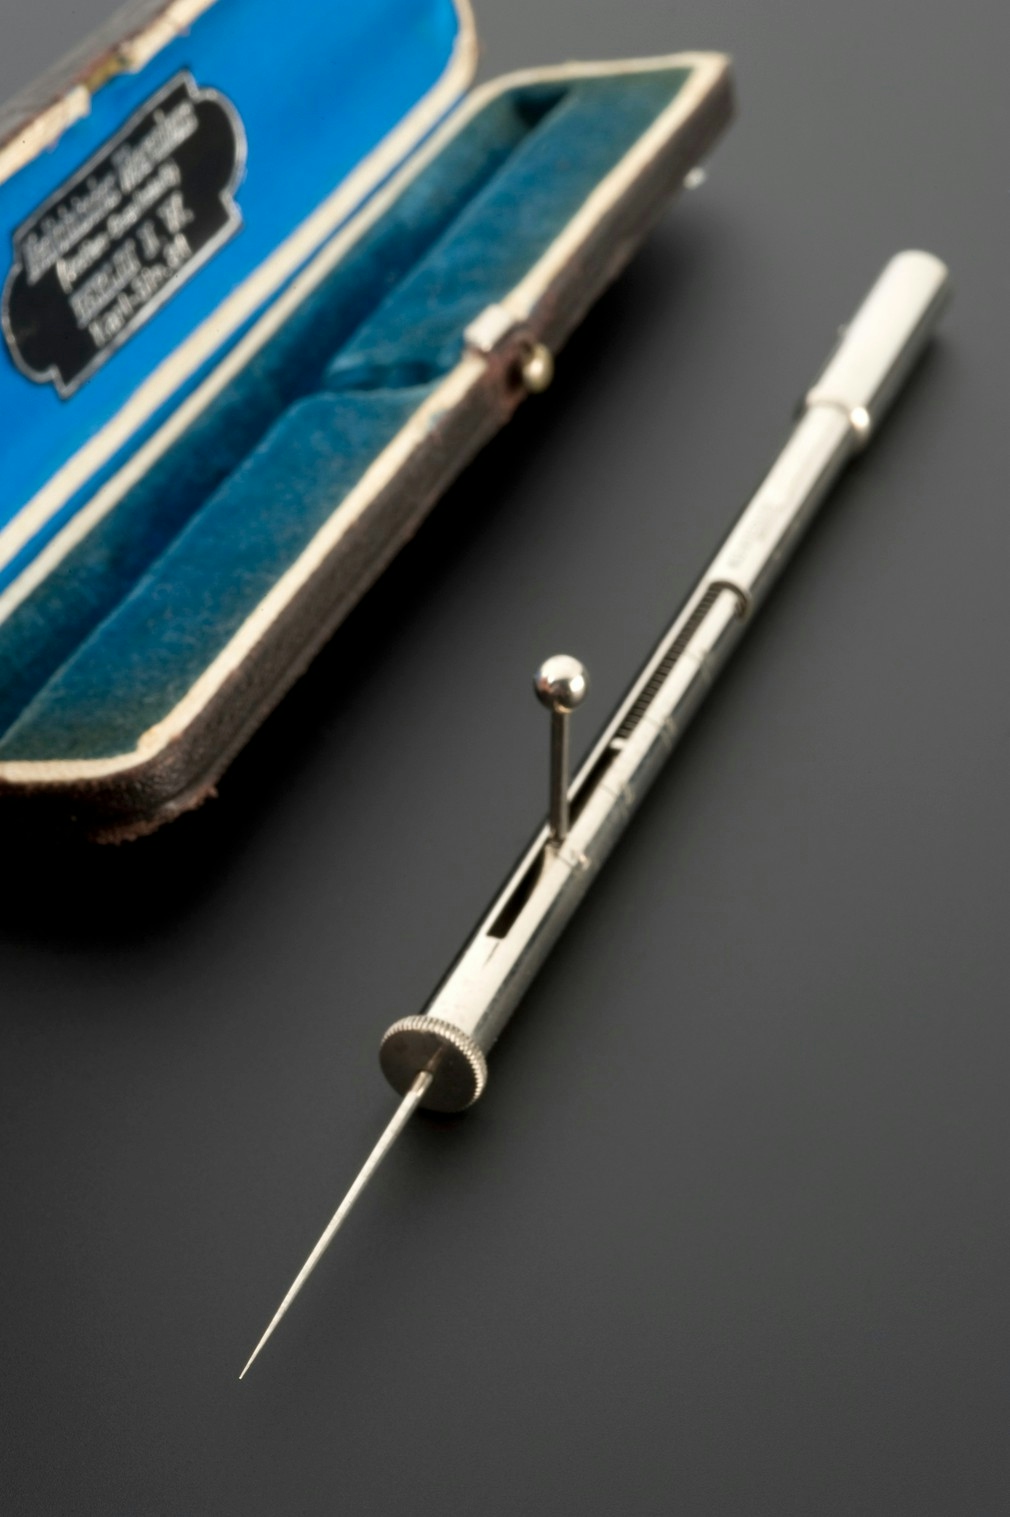 Photograph of an instrument case (in the background, lined with blue velvet) and a silver instrument called an algesimeter, which is a needle attached to a tube with a measure on the side to record the depth that a person is pricked before pain is expressed.